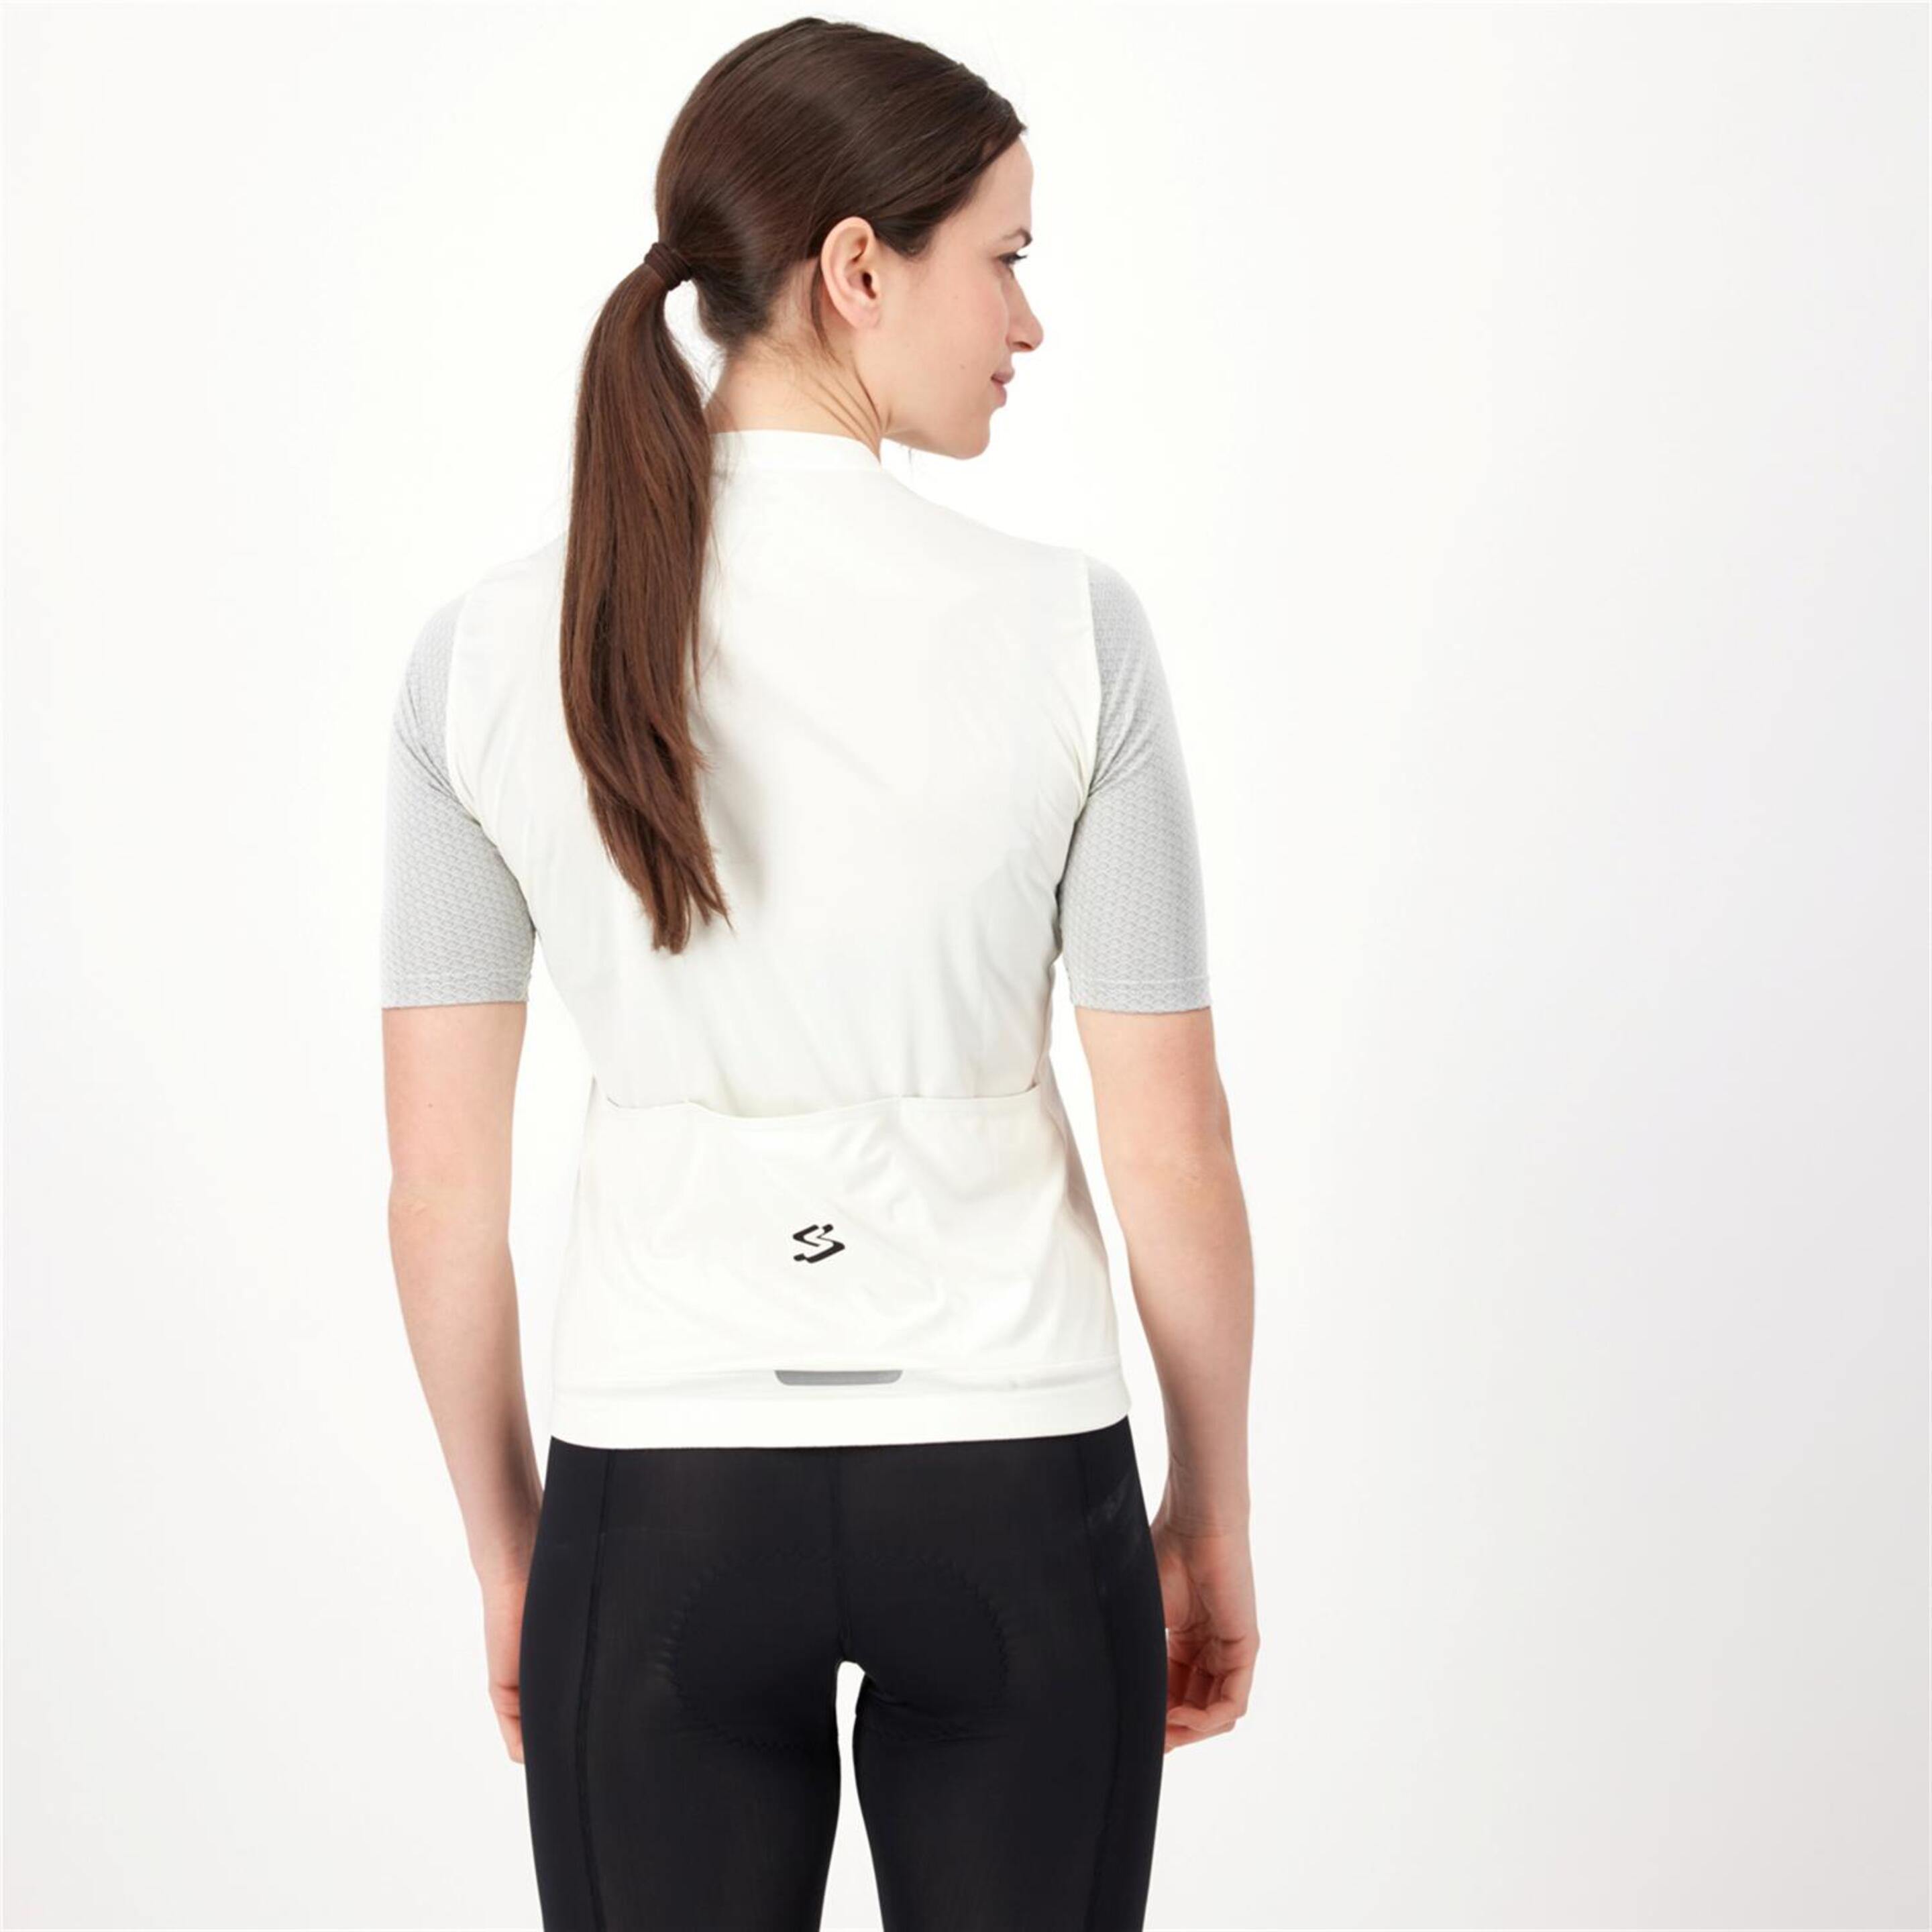 Spiuk Anatomic - Blanco - Maillot Ciclismo Mujer